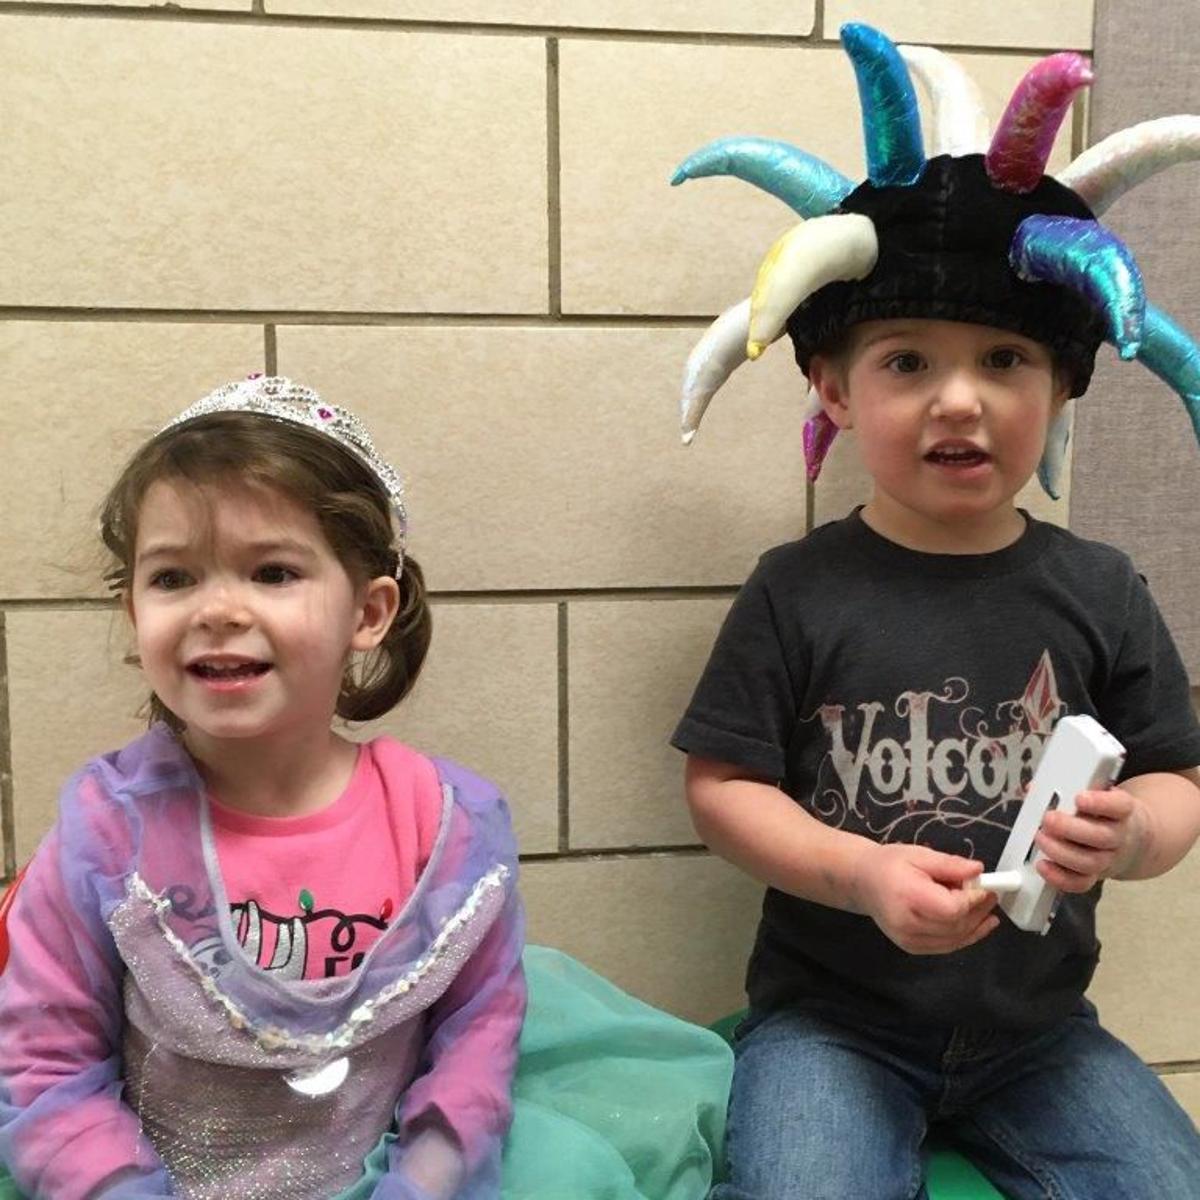 Purim events in Greater Cleveland